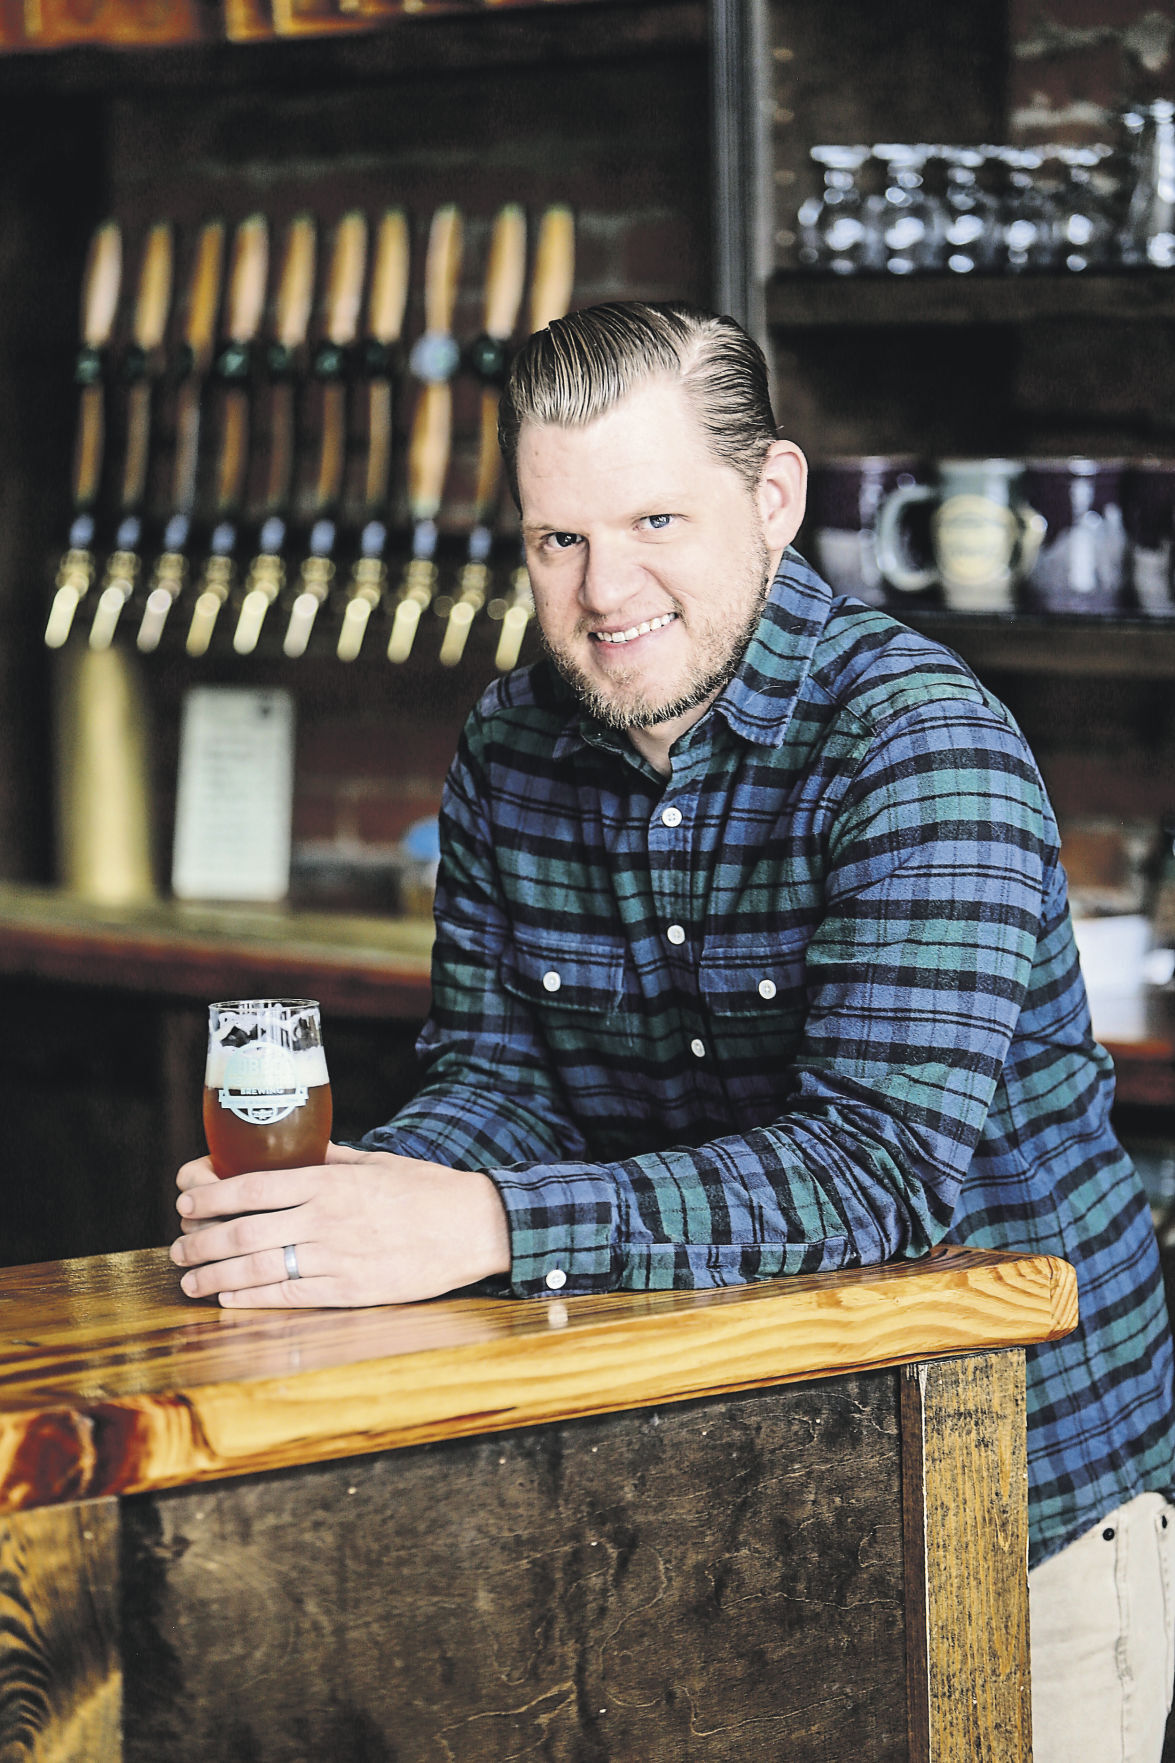 Jay Jubeck is the owner of Jubeck New World Brewing in Dubuque.    PHOTO CREDIT: Dave Kettering